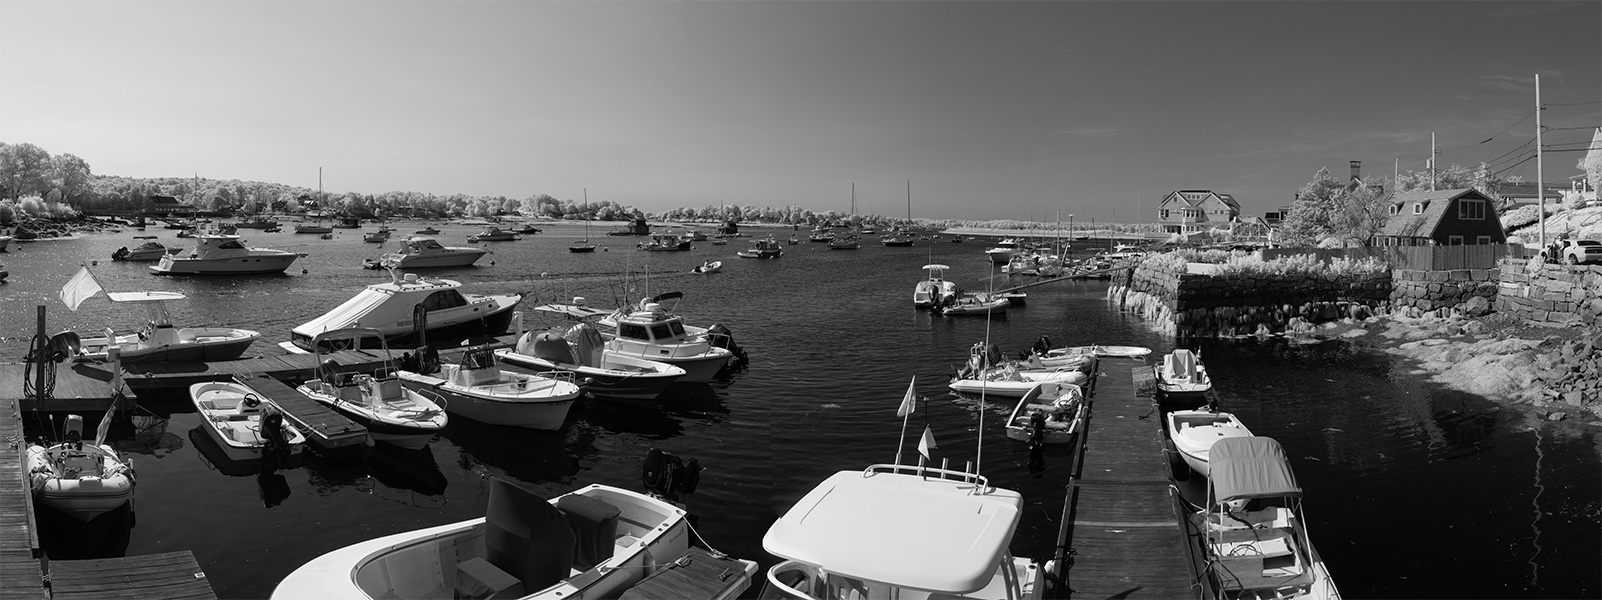 Infrared Panoramic Photo of Pleasure Boat Anchorage.